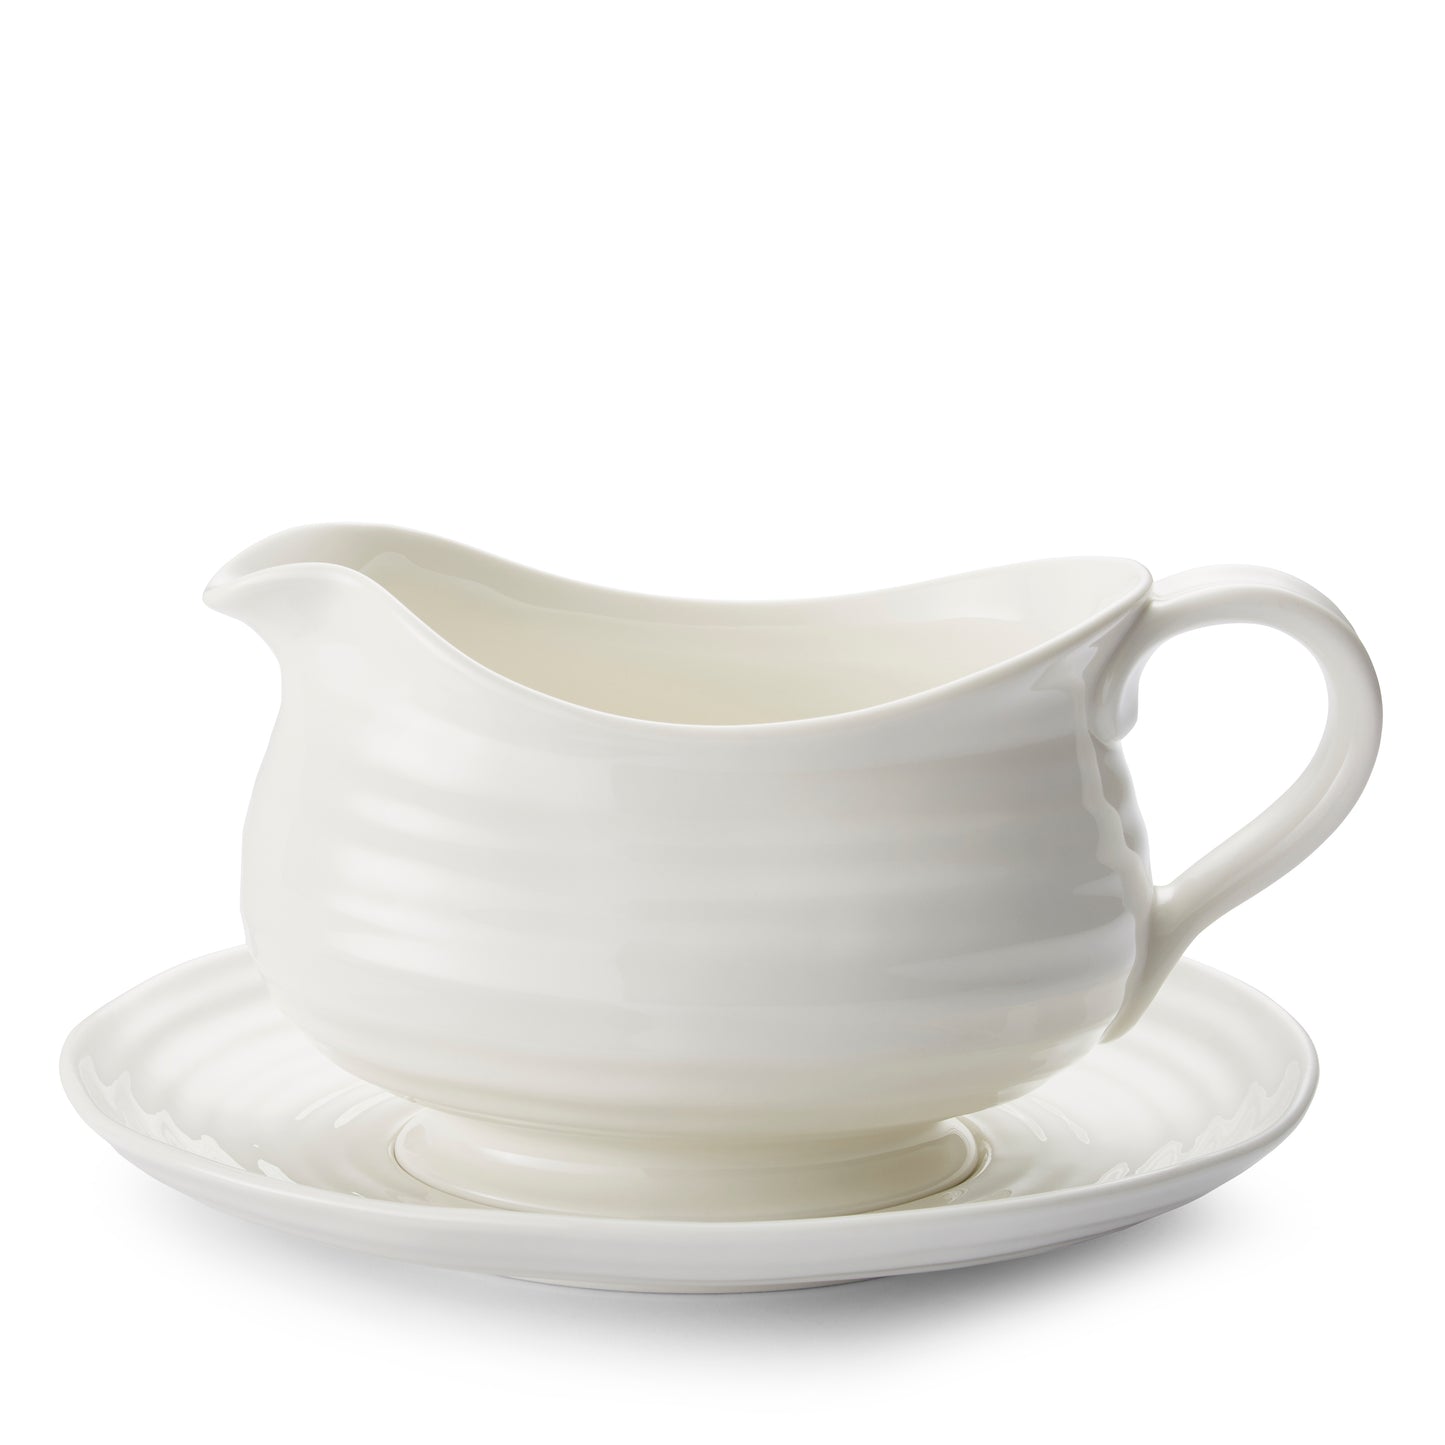 Sophie Conran for Portmeirion White Gravy Boat and Stand